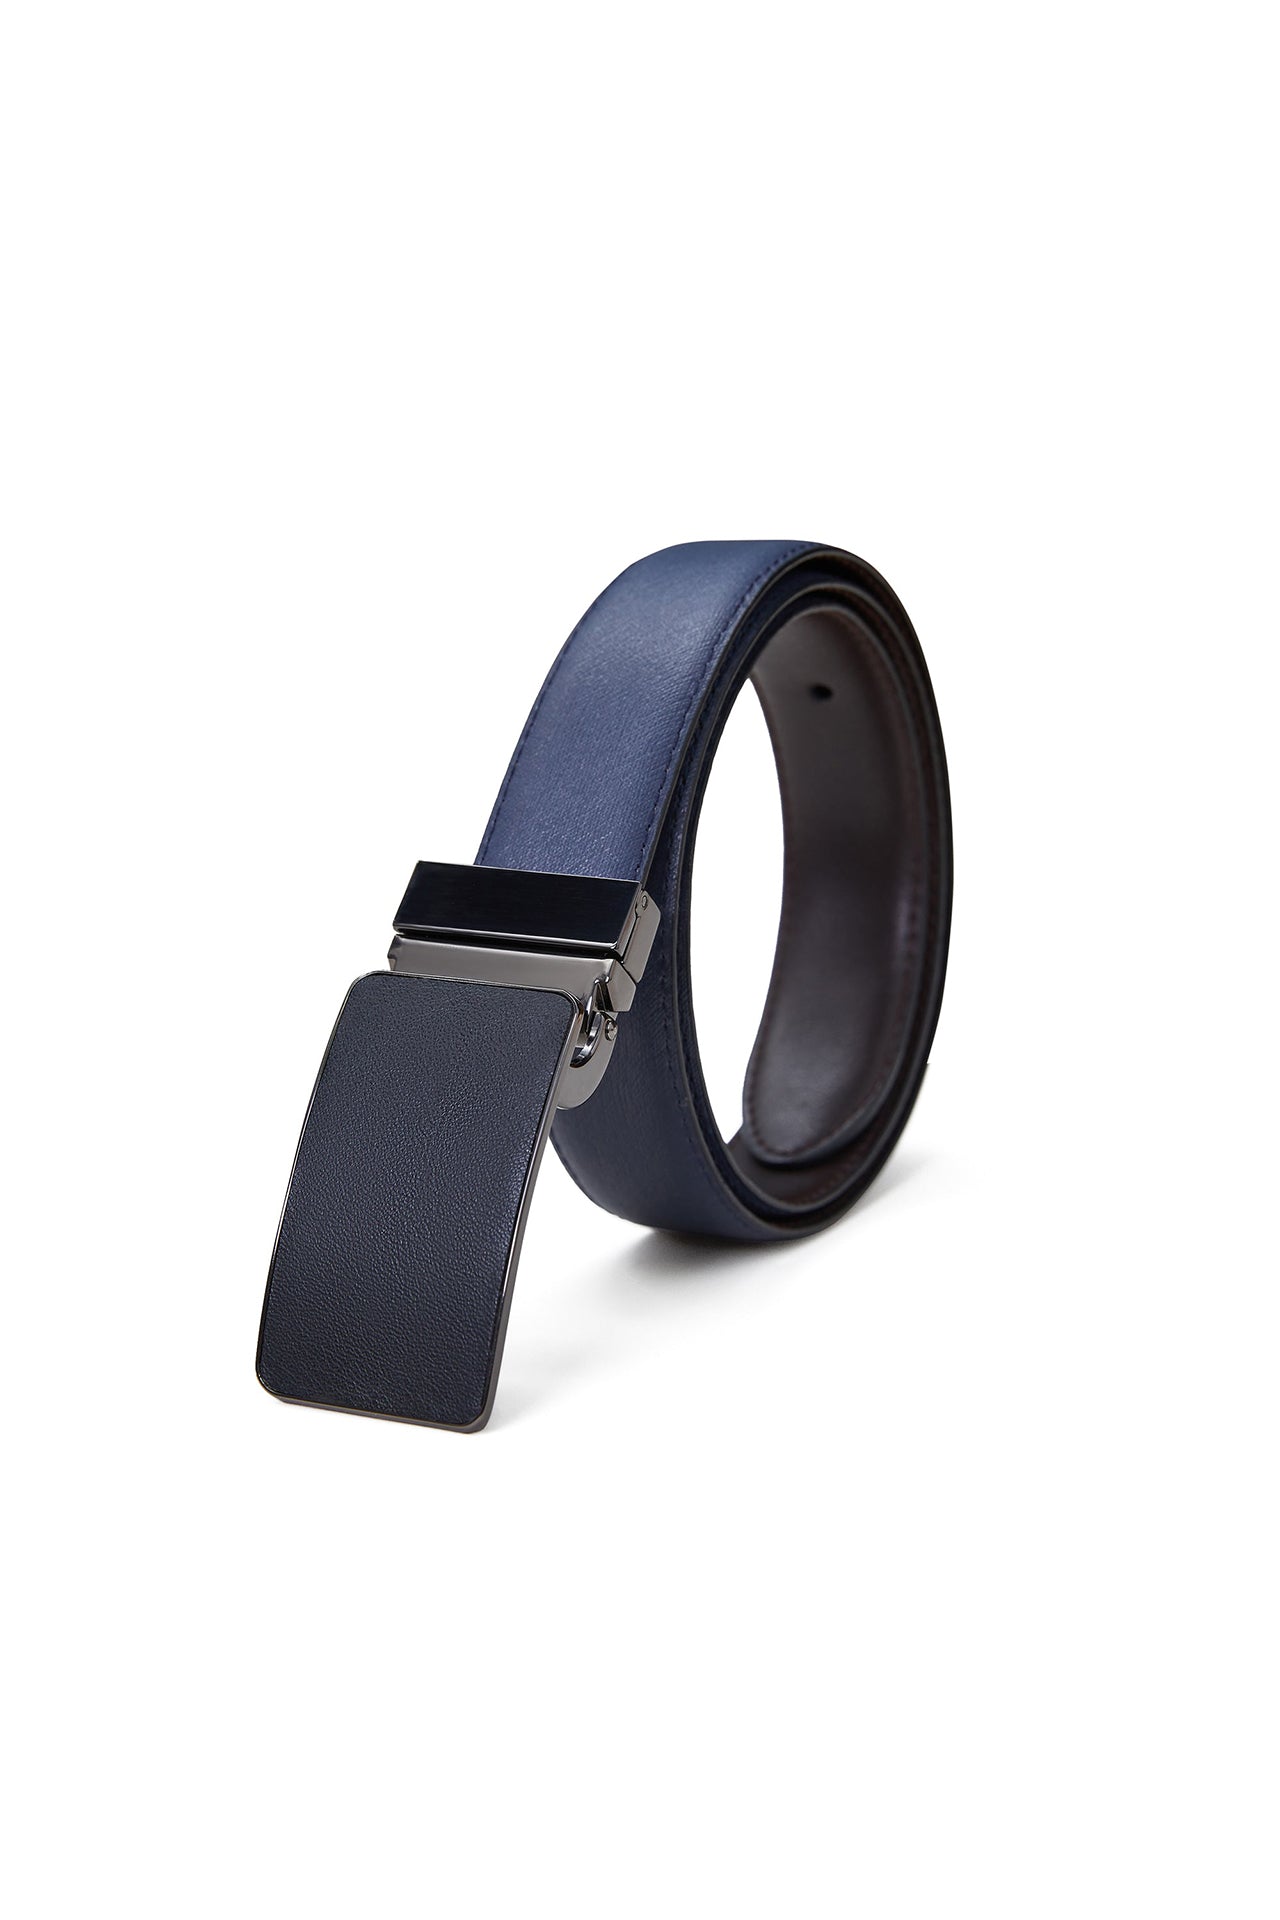 35mm Square Buckle [Without Strap]